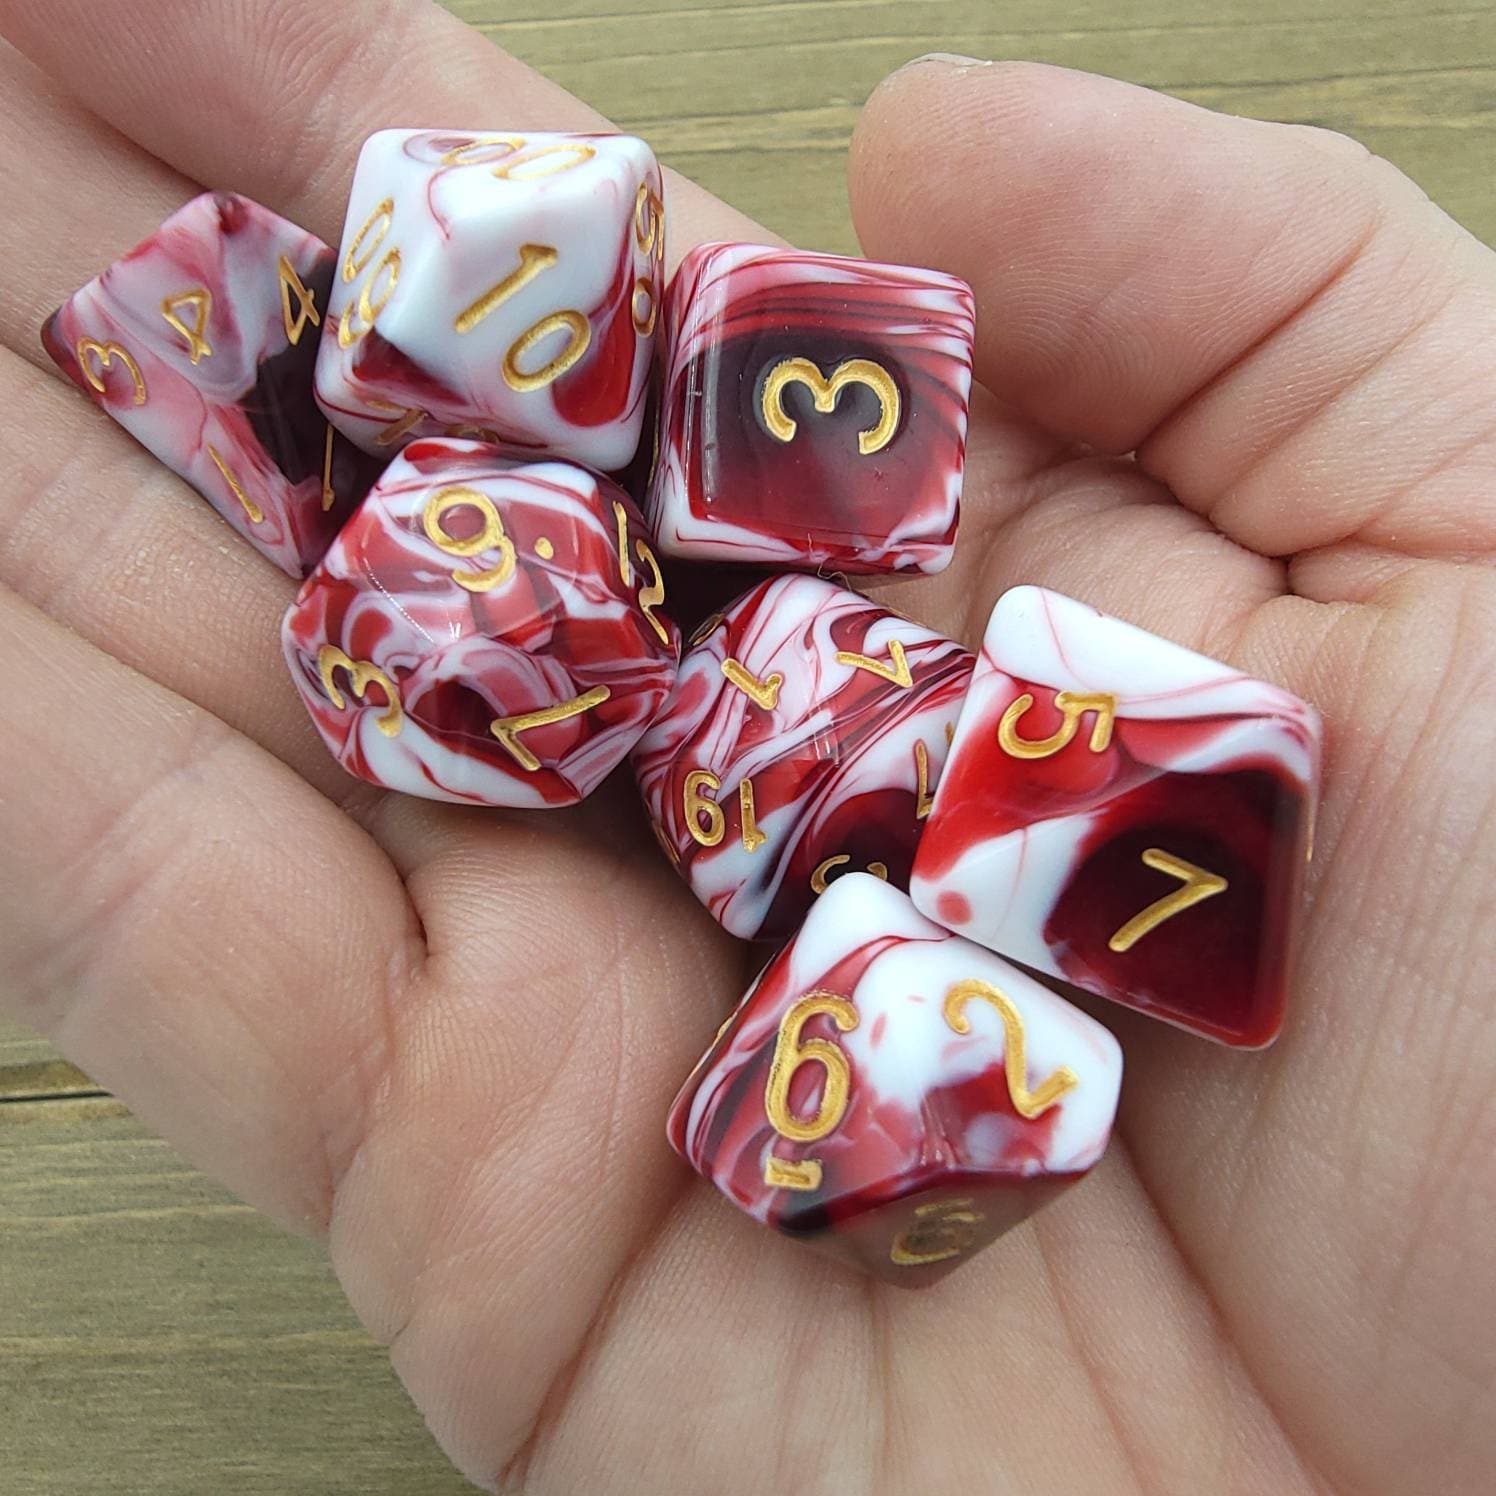 Cherry Swirl | RPG Dice Set| RPG Dice | Polyhedral Dice Set | Dungeons and Dragons | DnD Dice Set | Gaming Dice Set